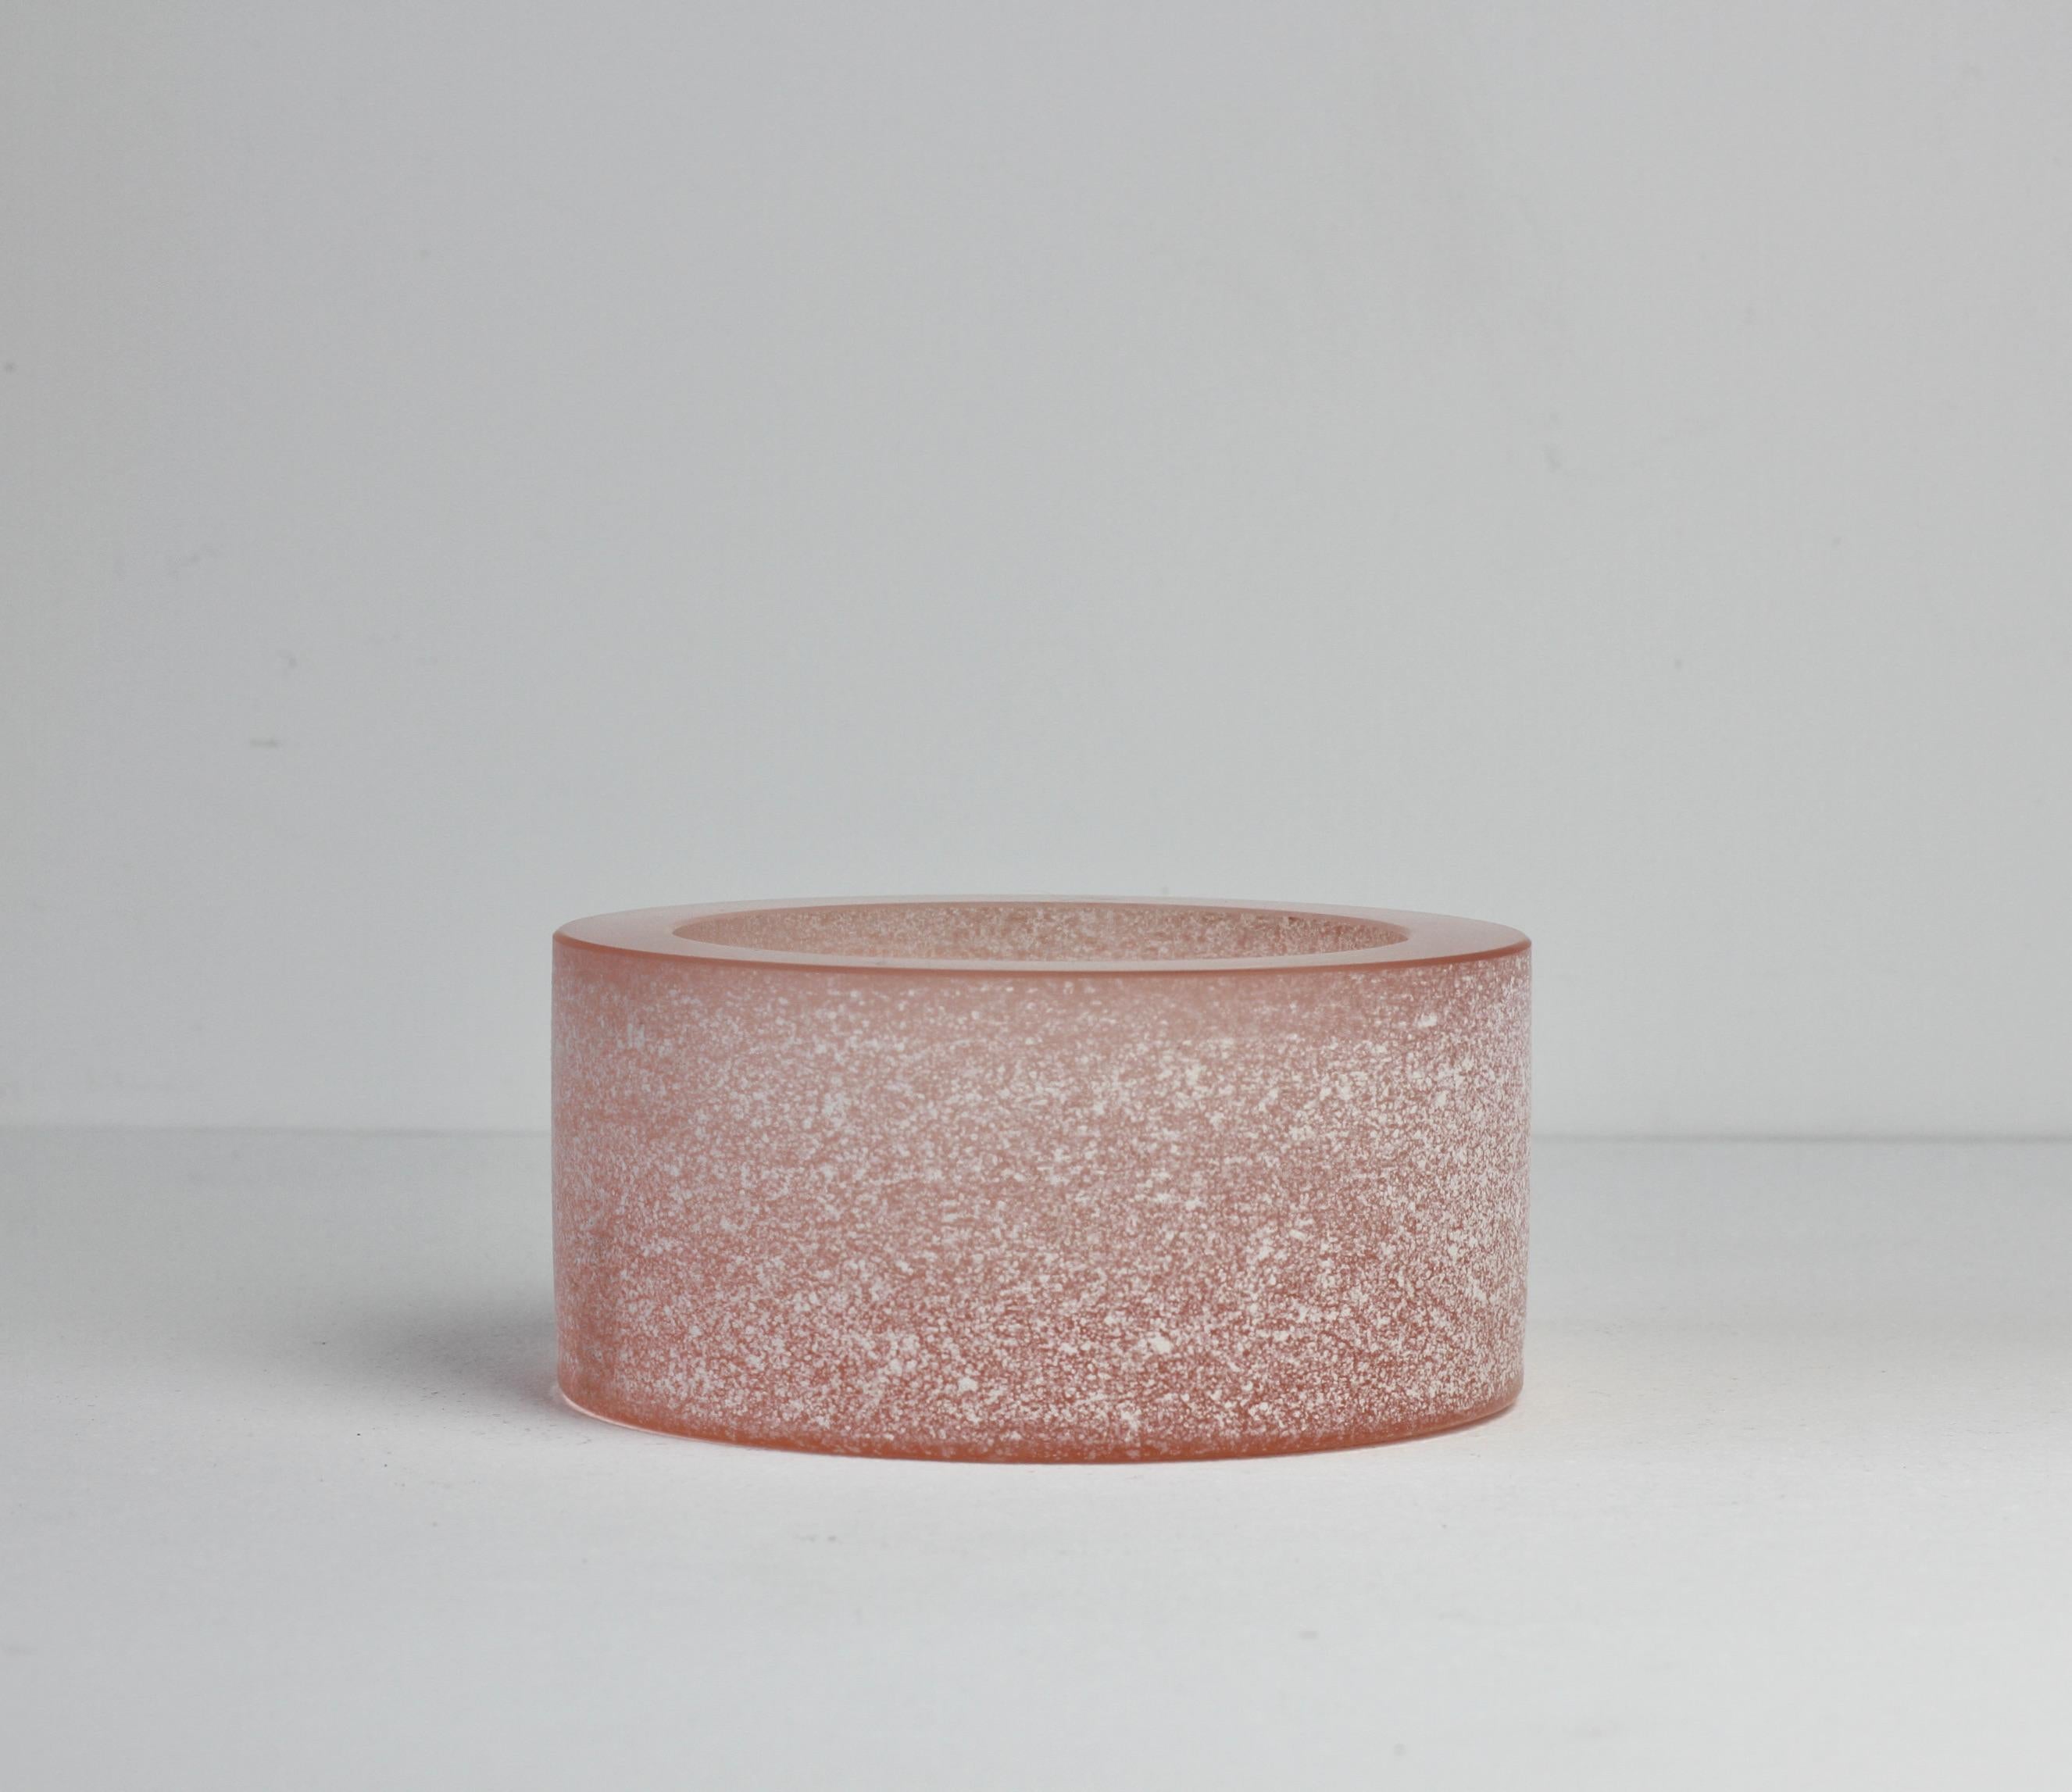 Stunning soft pink 'a Scavo' white colored / coloured round circular glass bowl, dish or ashtray by Seguso Vetri d'Arte Murano, Italy, circa 1980s. Elegant in form - rather minimalist but with the obvious sign of quality with the thick and heavy lip